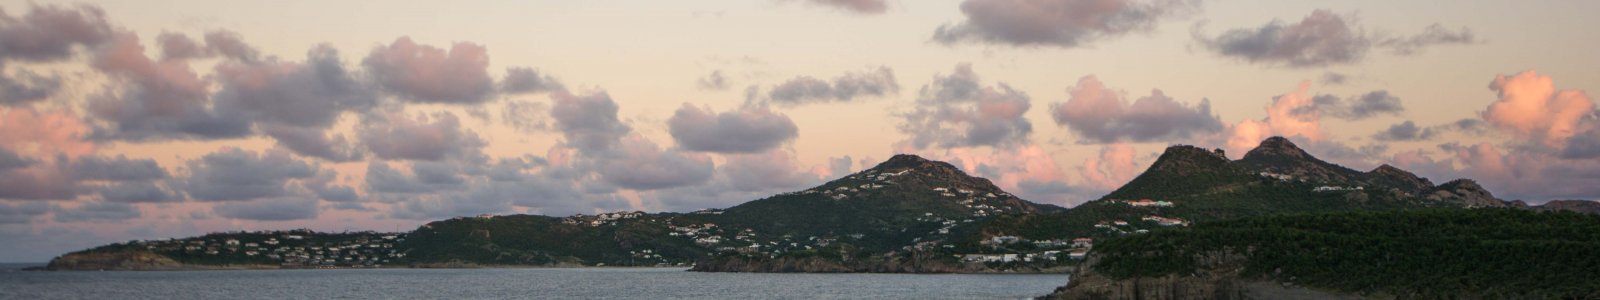 Where to Stay on St. Barth